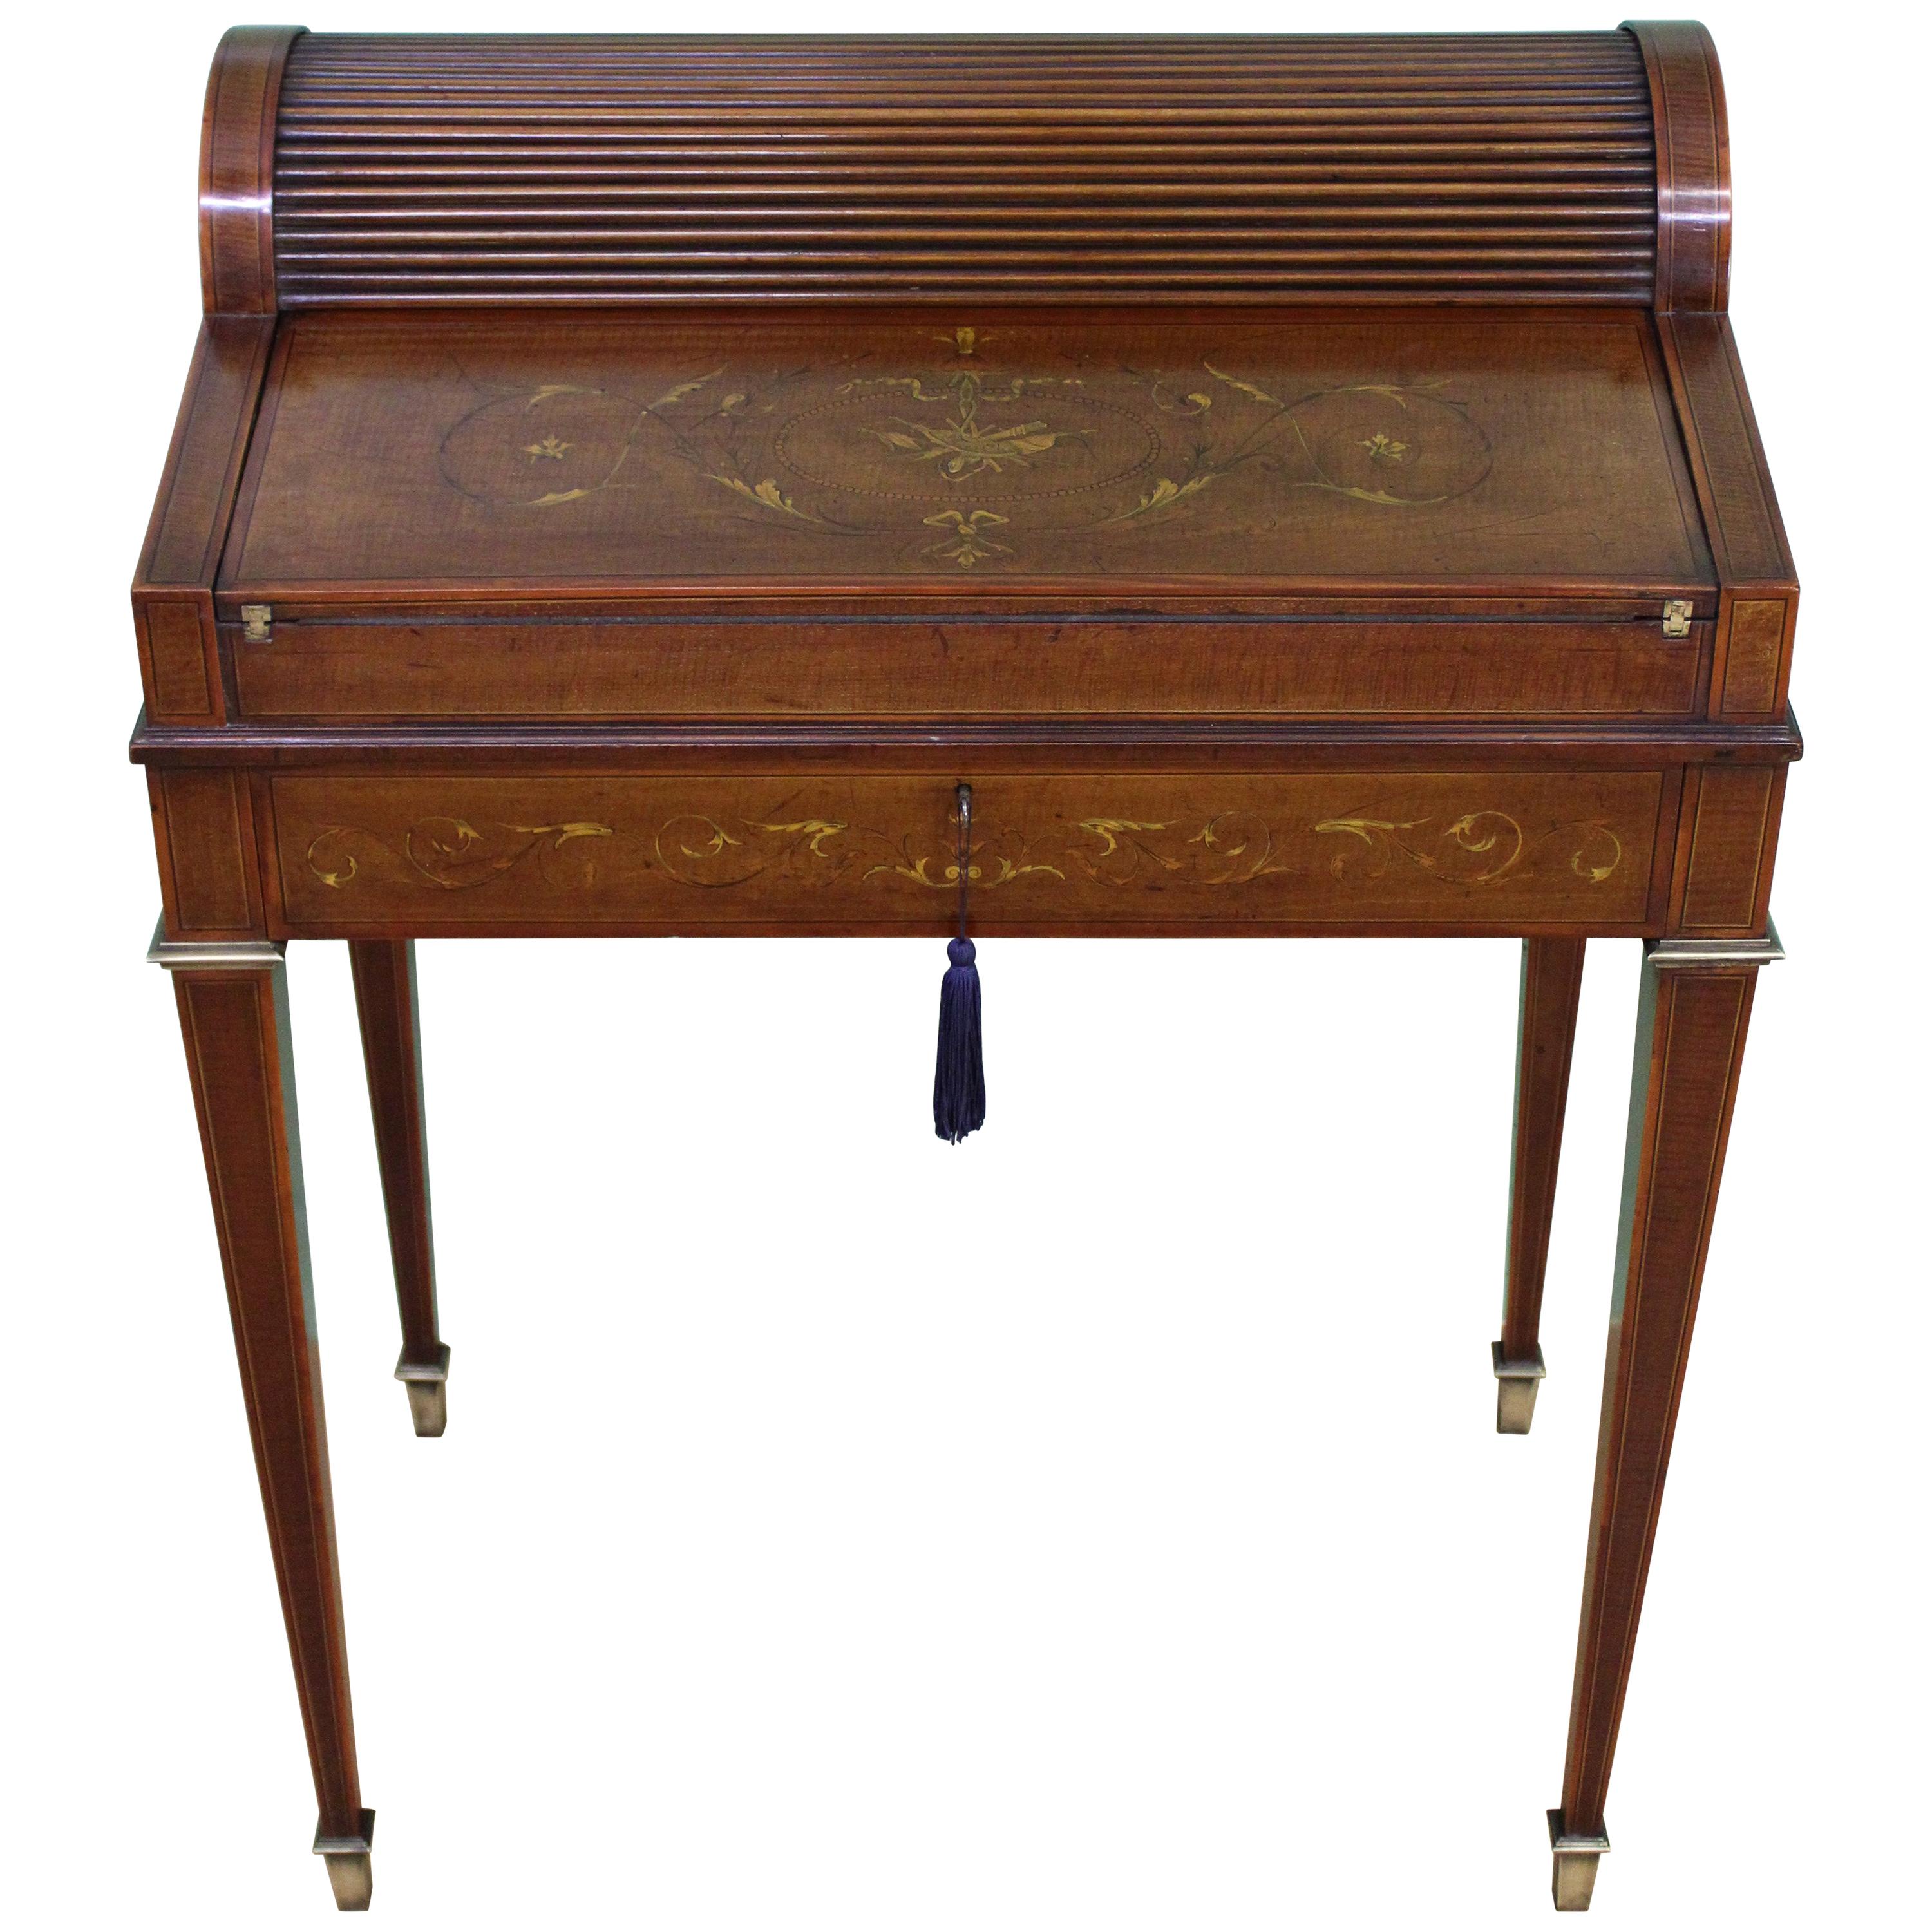 Late Victorian Inlaid Mahogany Tambour Bureau by Druce and Co. of London